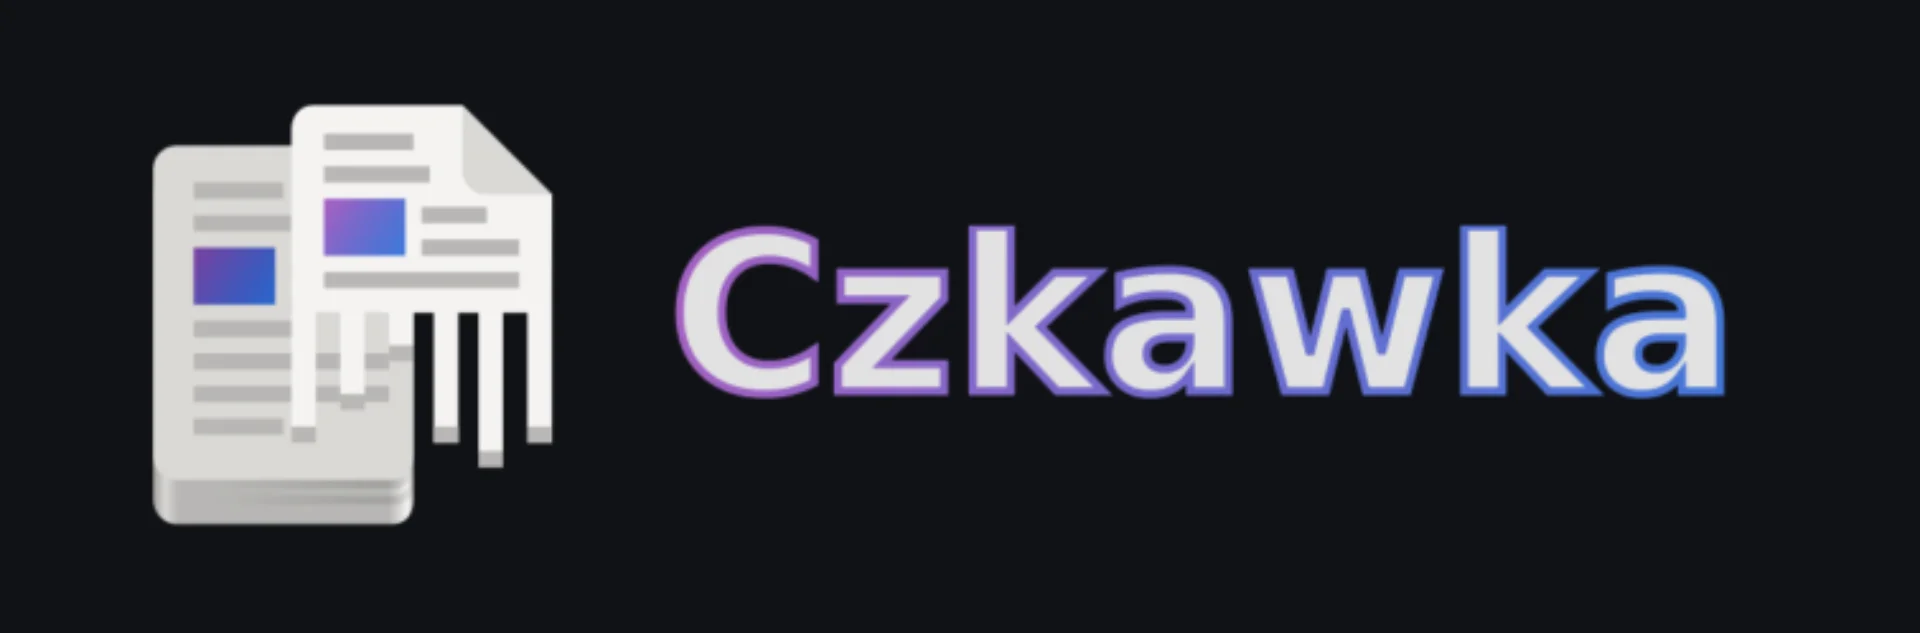 Czkawka – A comprehensive tool for thoroughly cleaning your hard drive